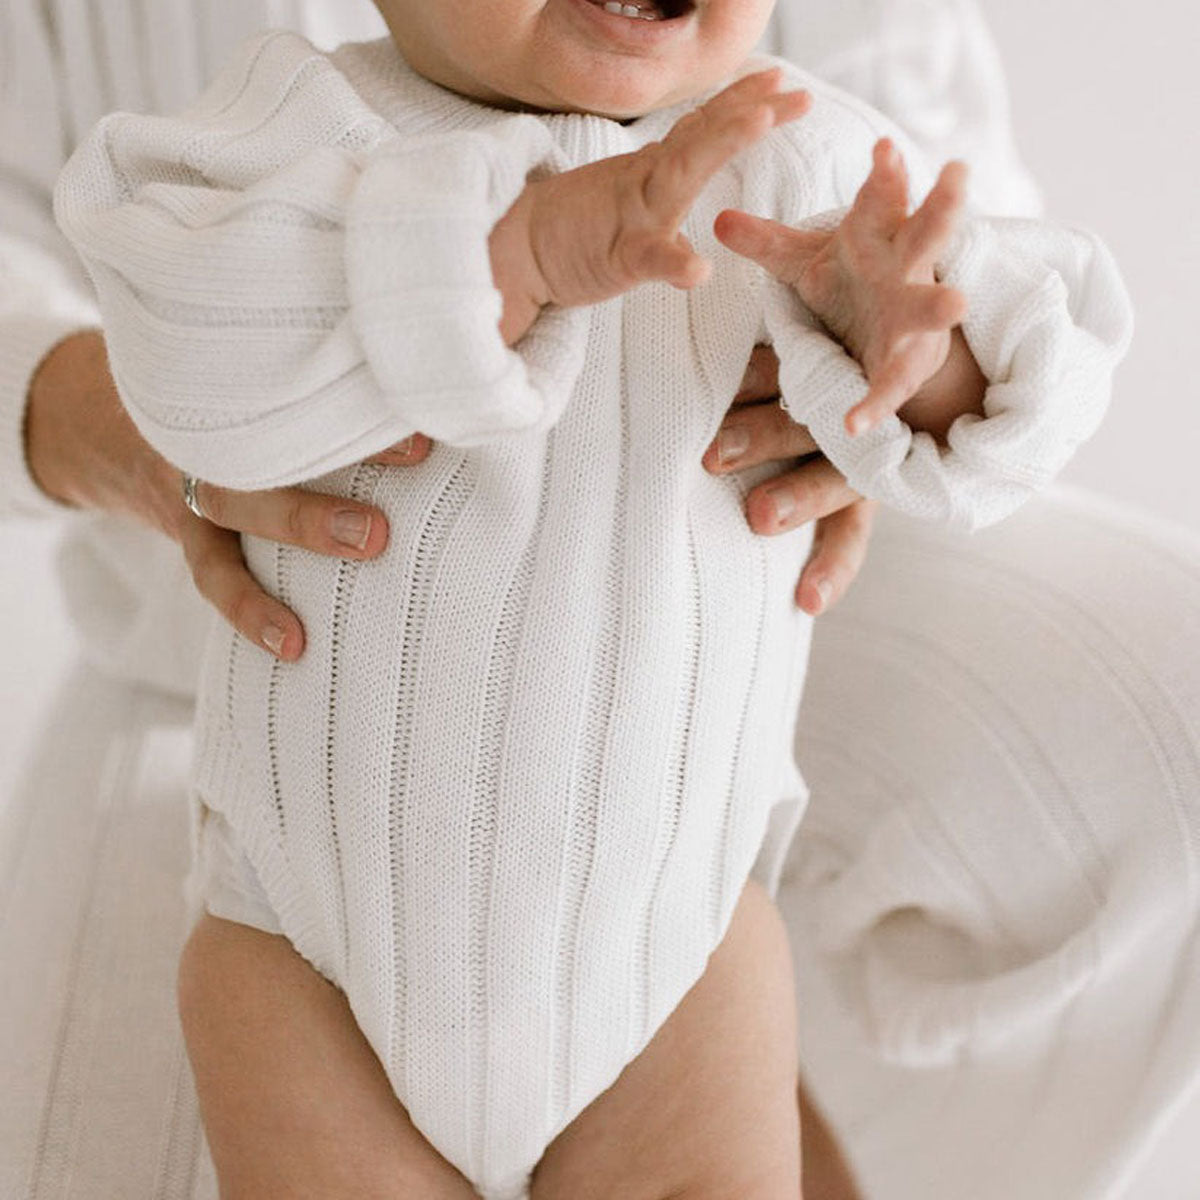 Baby wearing Oat and Co Wide Ribbed Knit Onesie - Dove